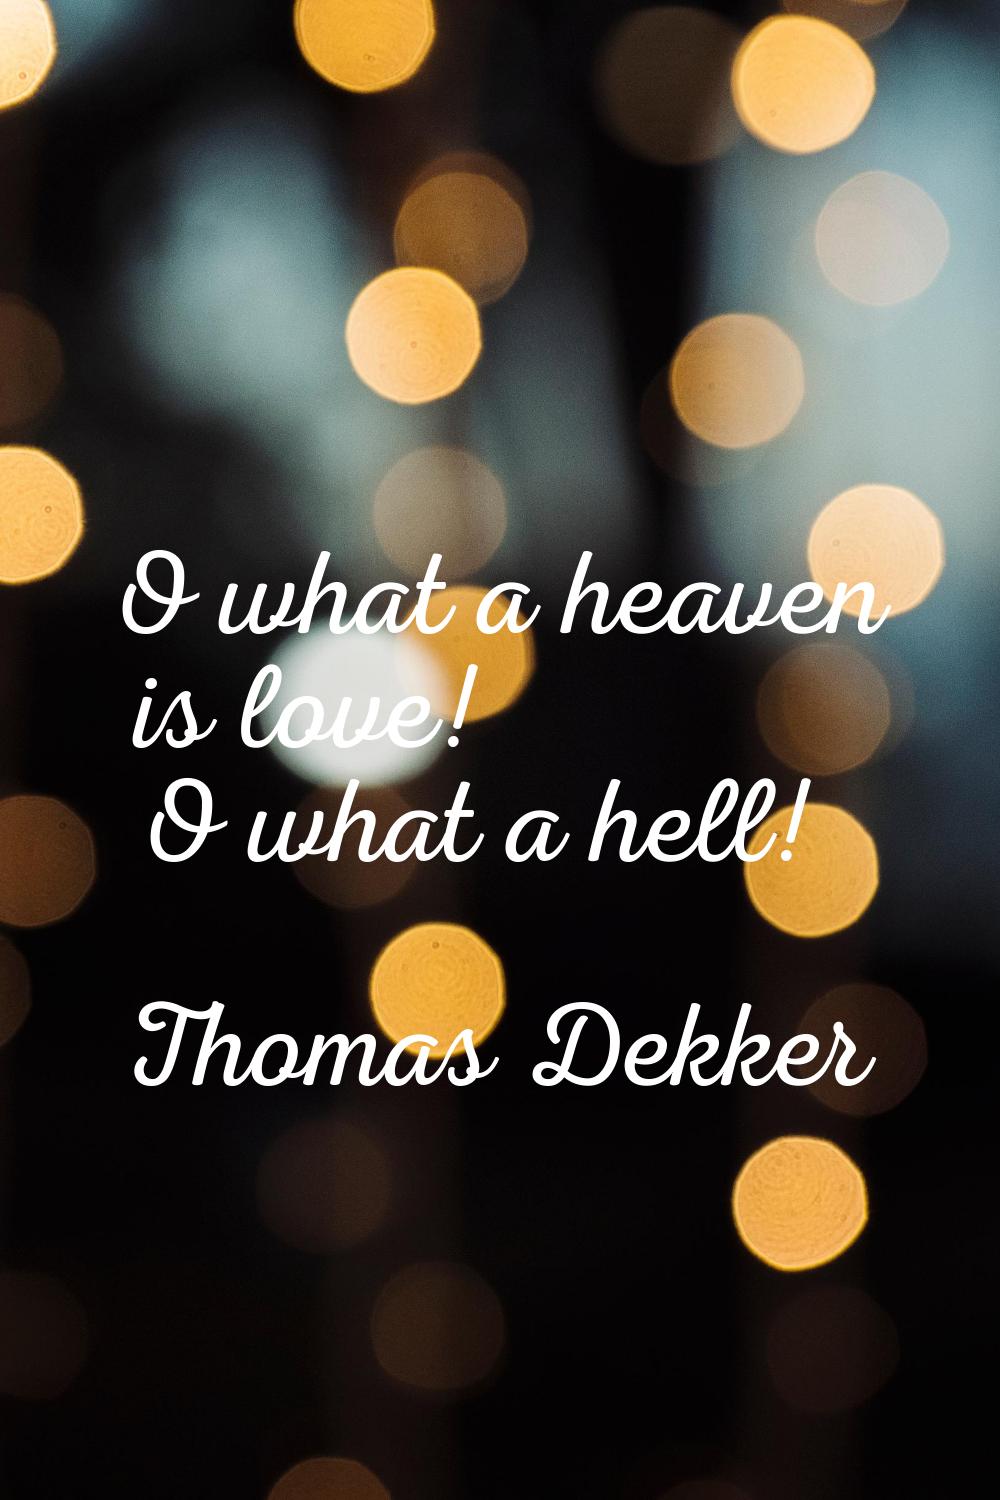 O what a heaven is love! O what a hell!